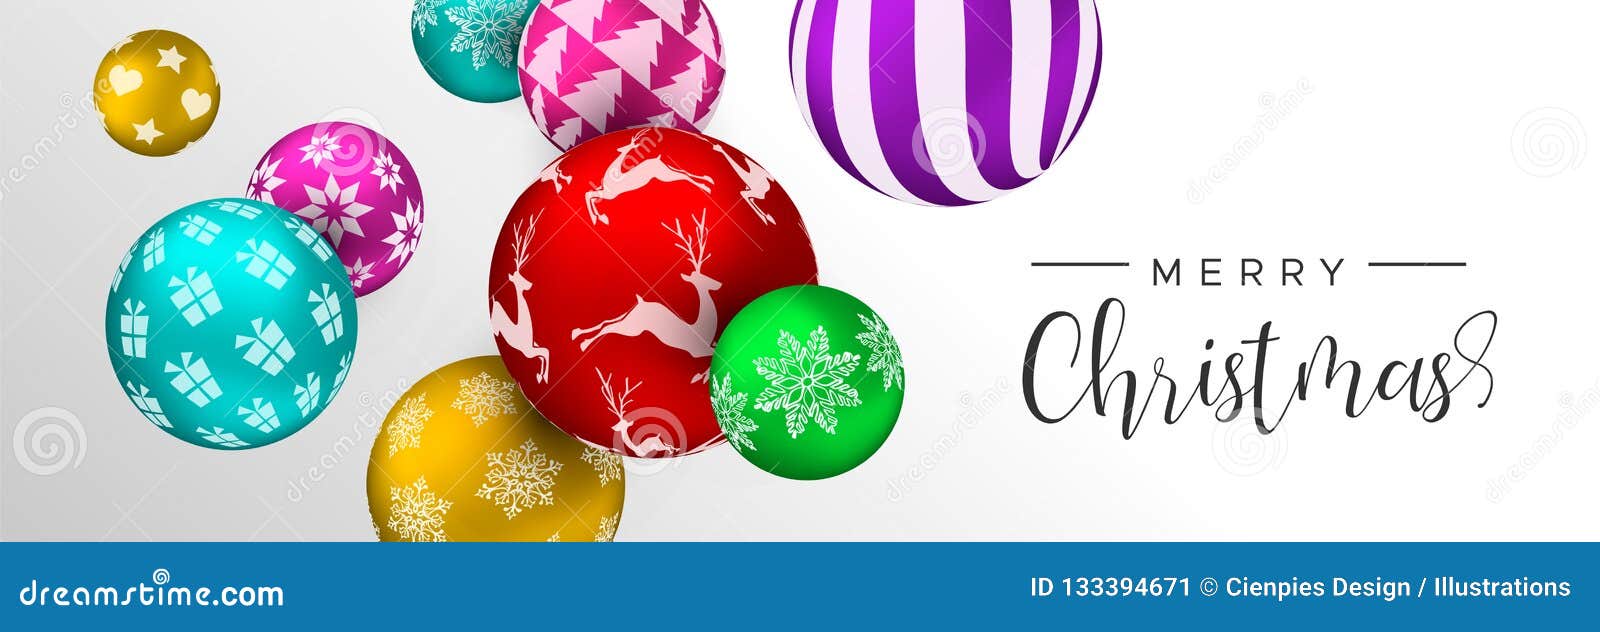 Christmas Colorful Bauble Ornament Web Banner Stock Vector ...